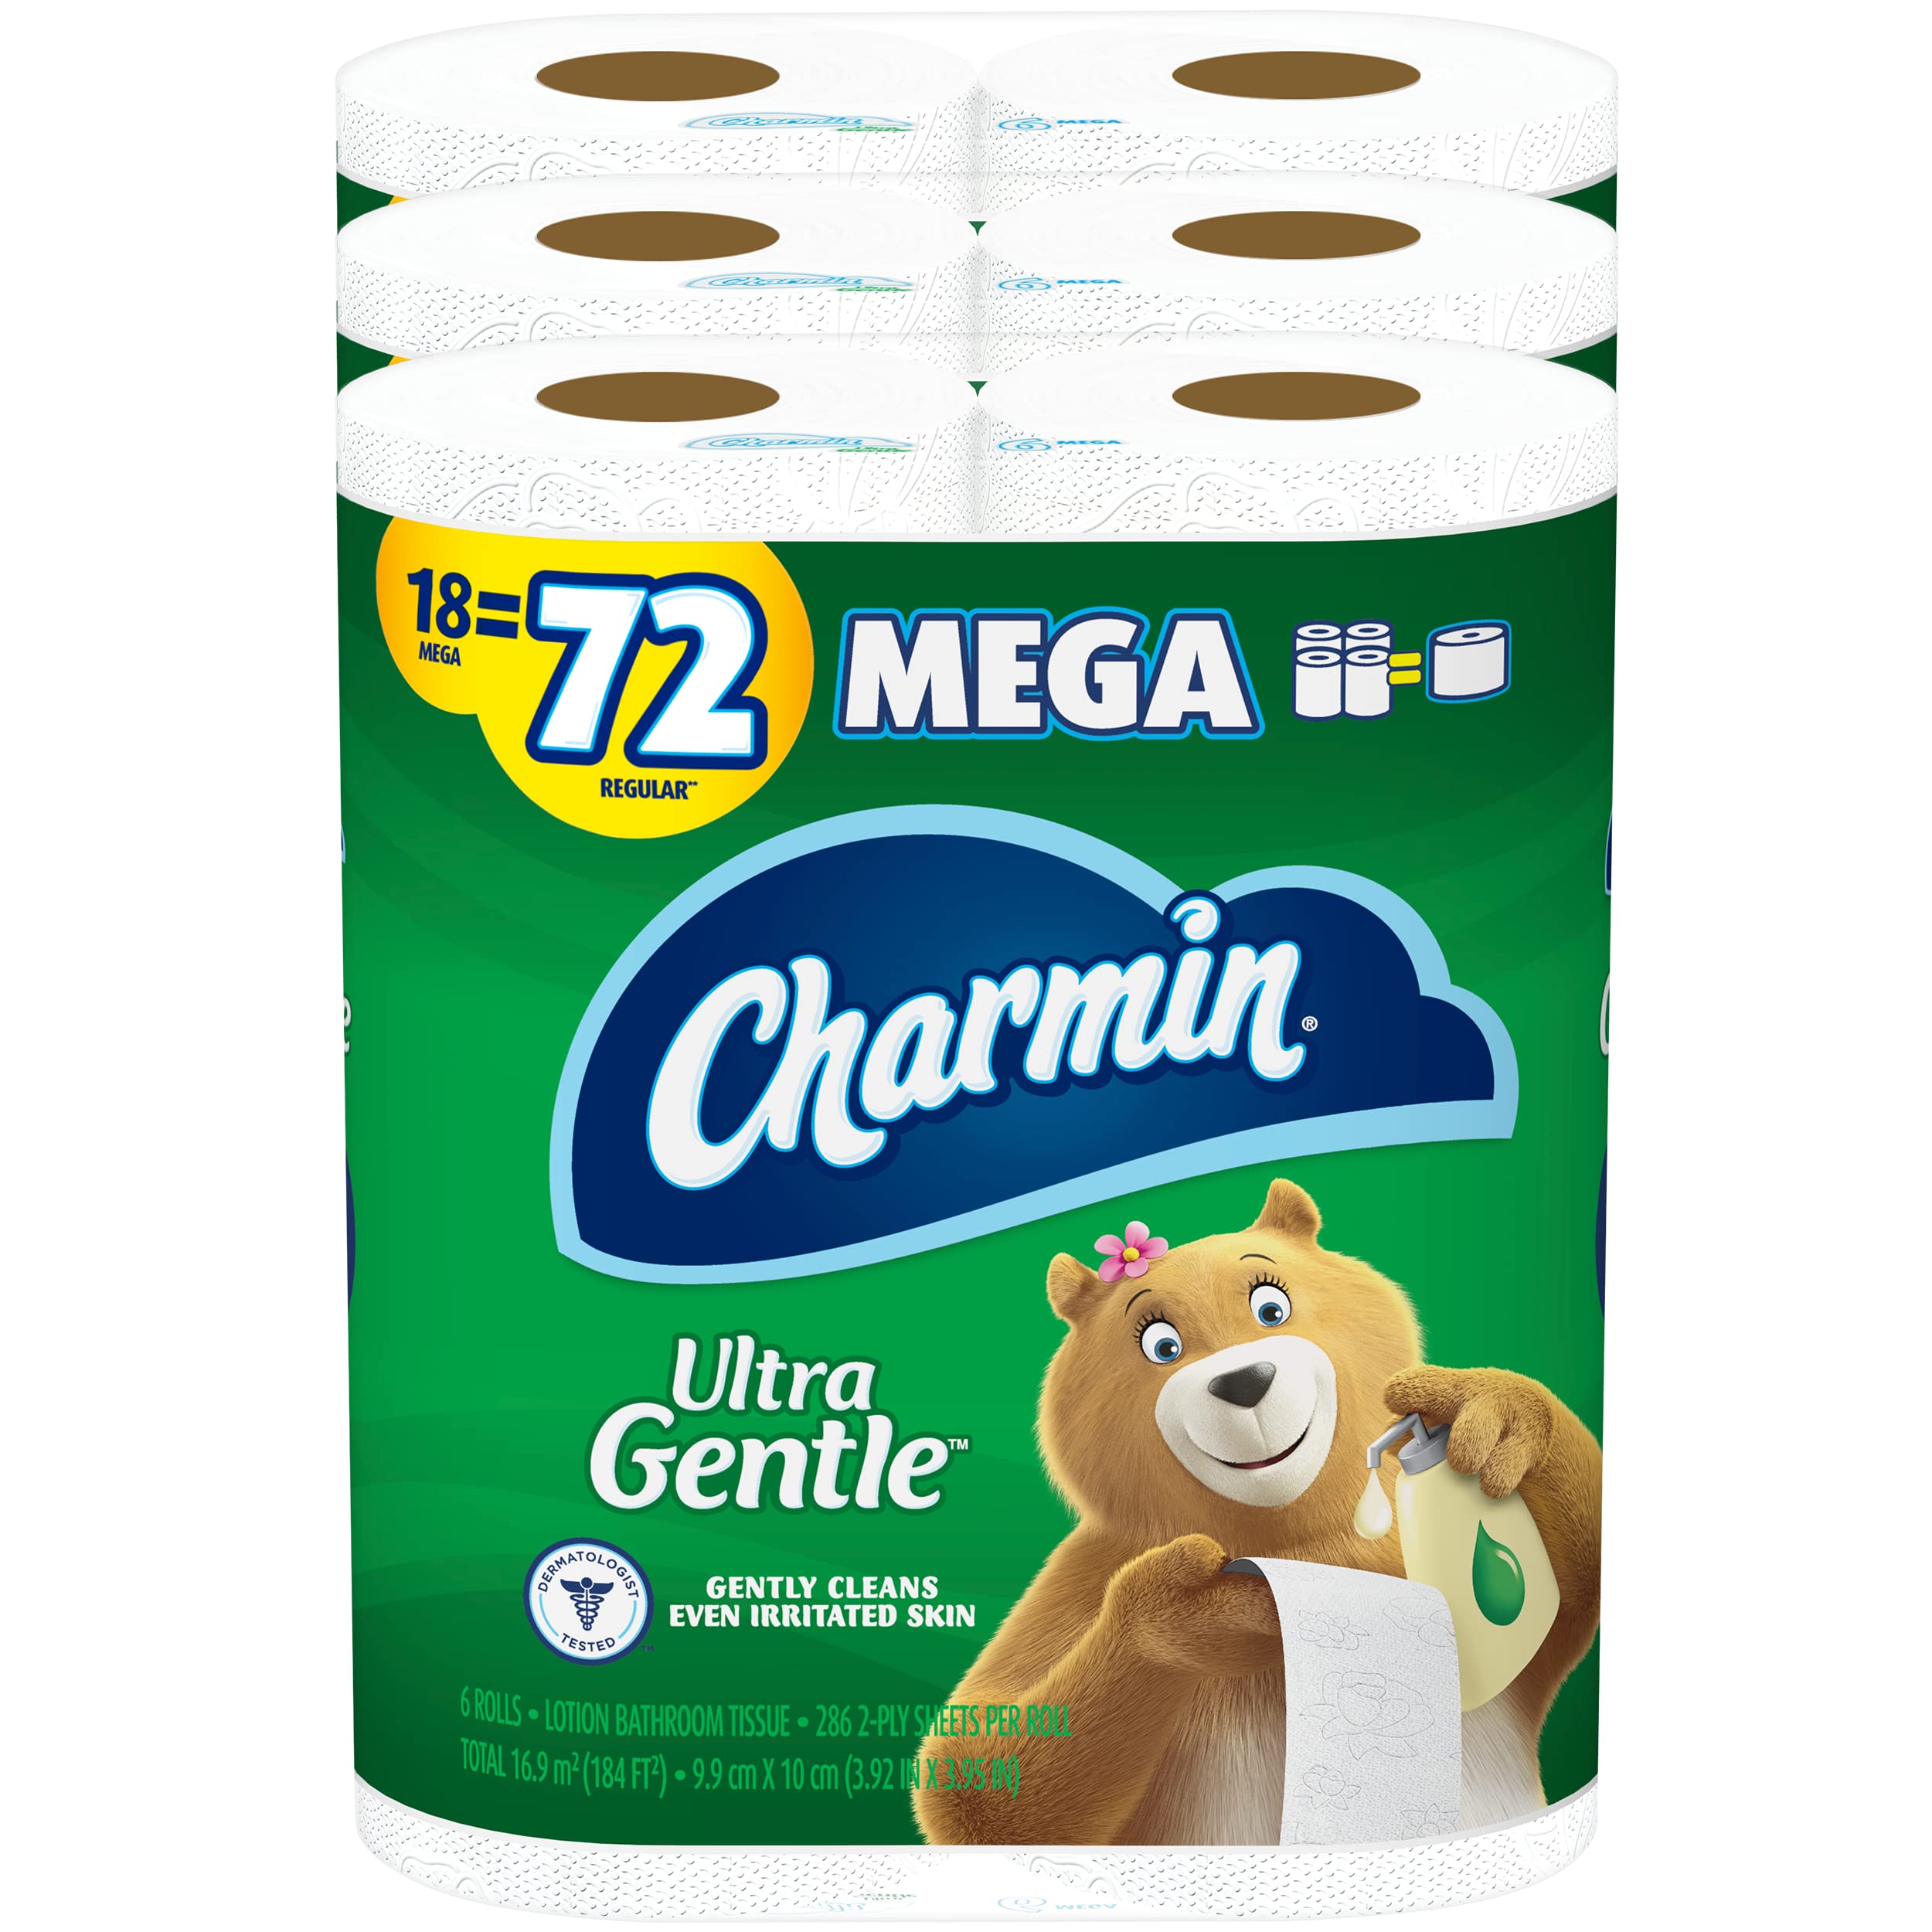 42-Count Charmin Ultra Toilet Paper Mega Rolls $36.55 w/ S&S + Free Shipping